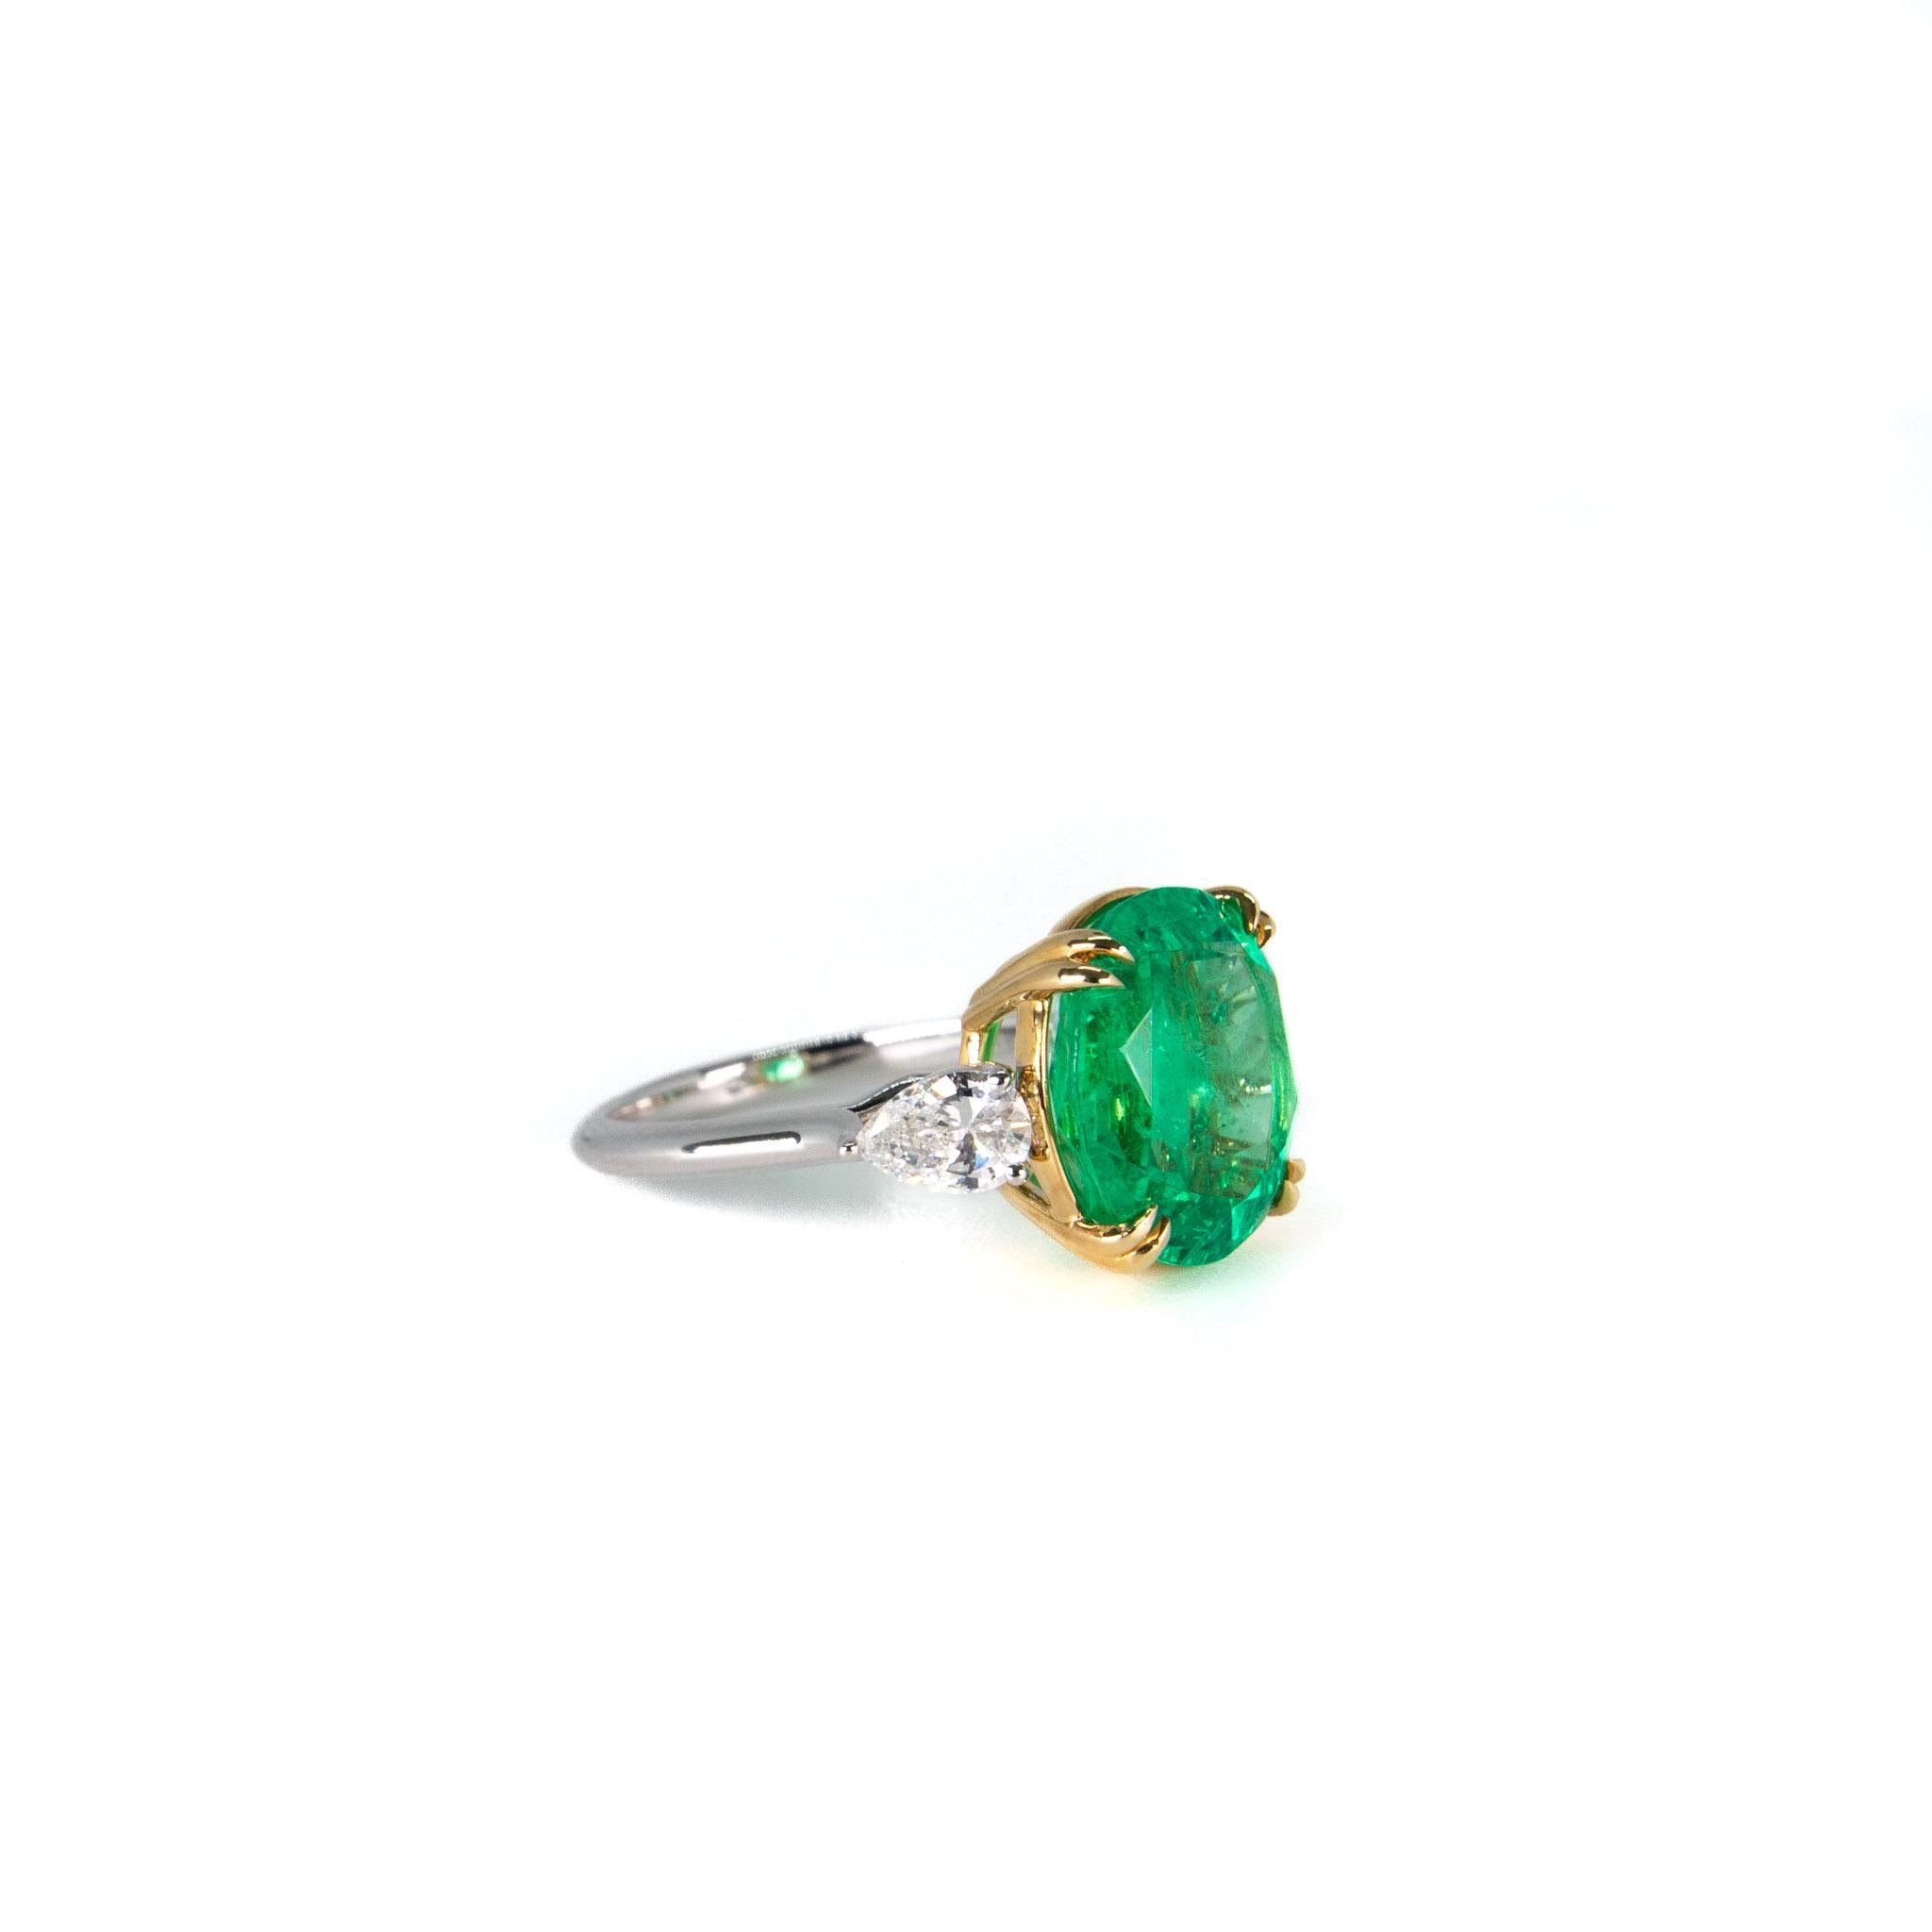 5.51ct Certified Colombian Emerald Insignificant Oil and Pear Shape Diamond Ring For Sale 6